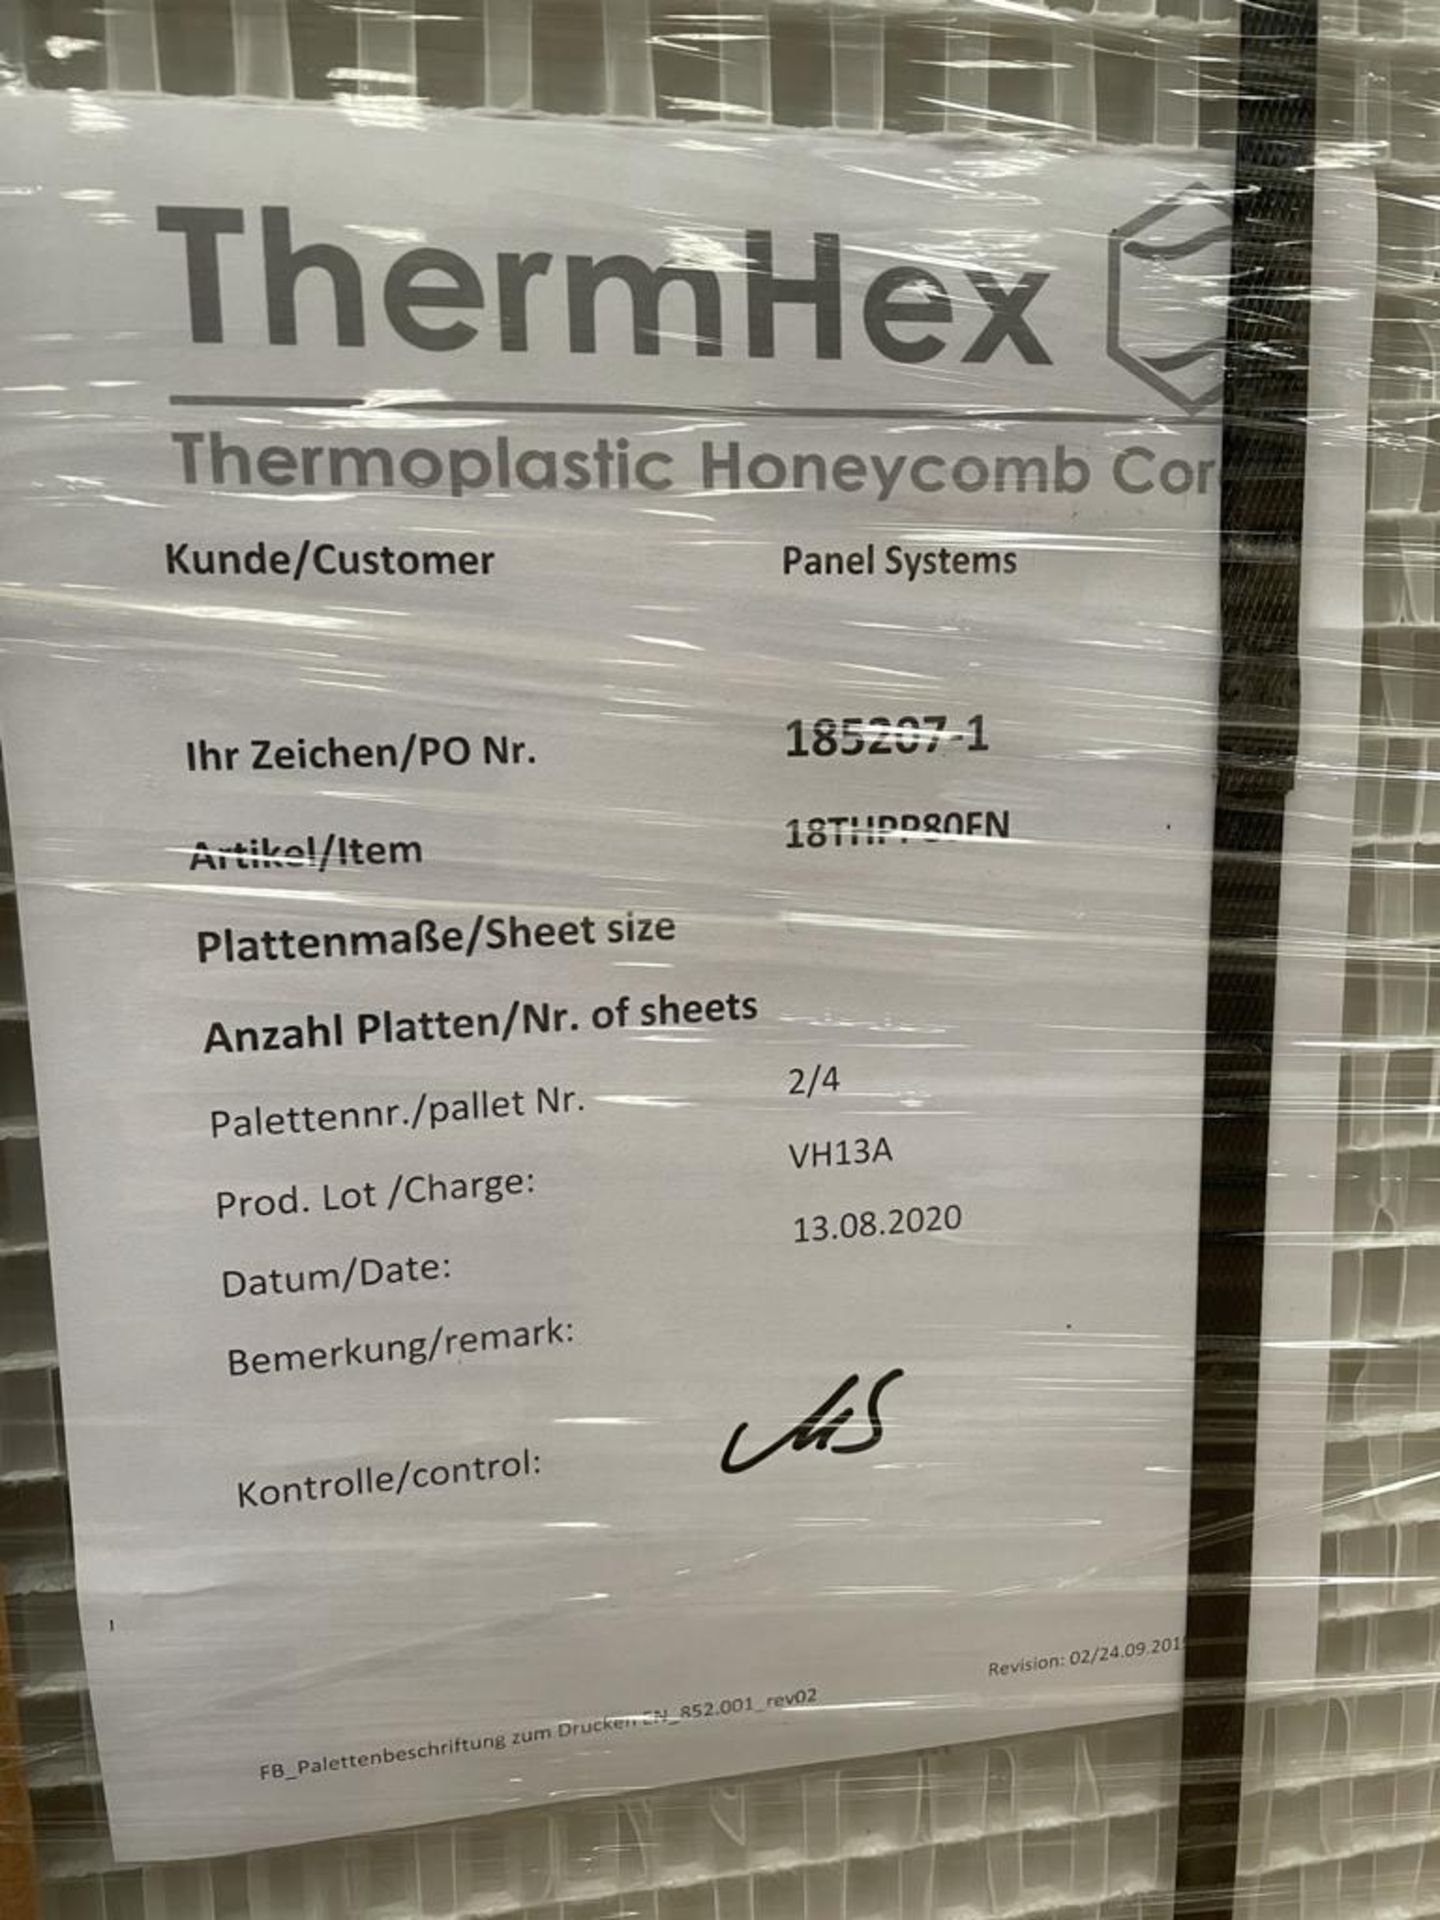 12 x ThermHex Thermoplastic Honeycomb Core Panels - Size 3558 x 1215 x 20mm - New Stock - - Image 10 of 15